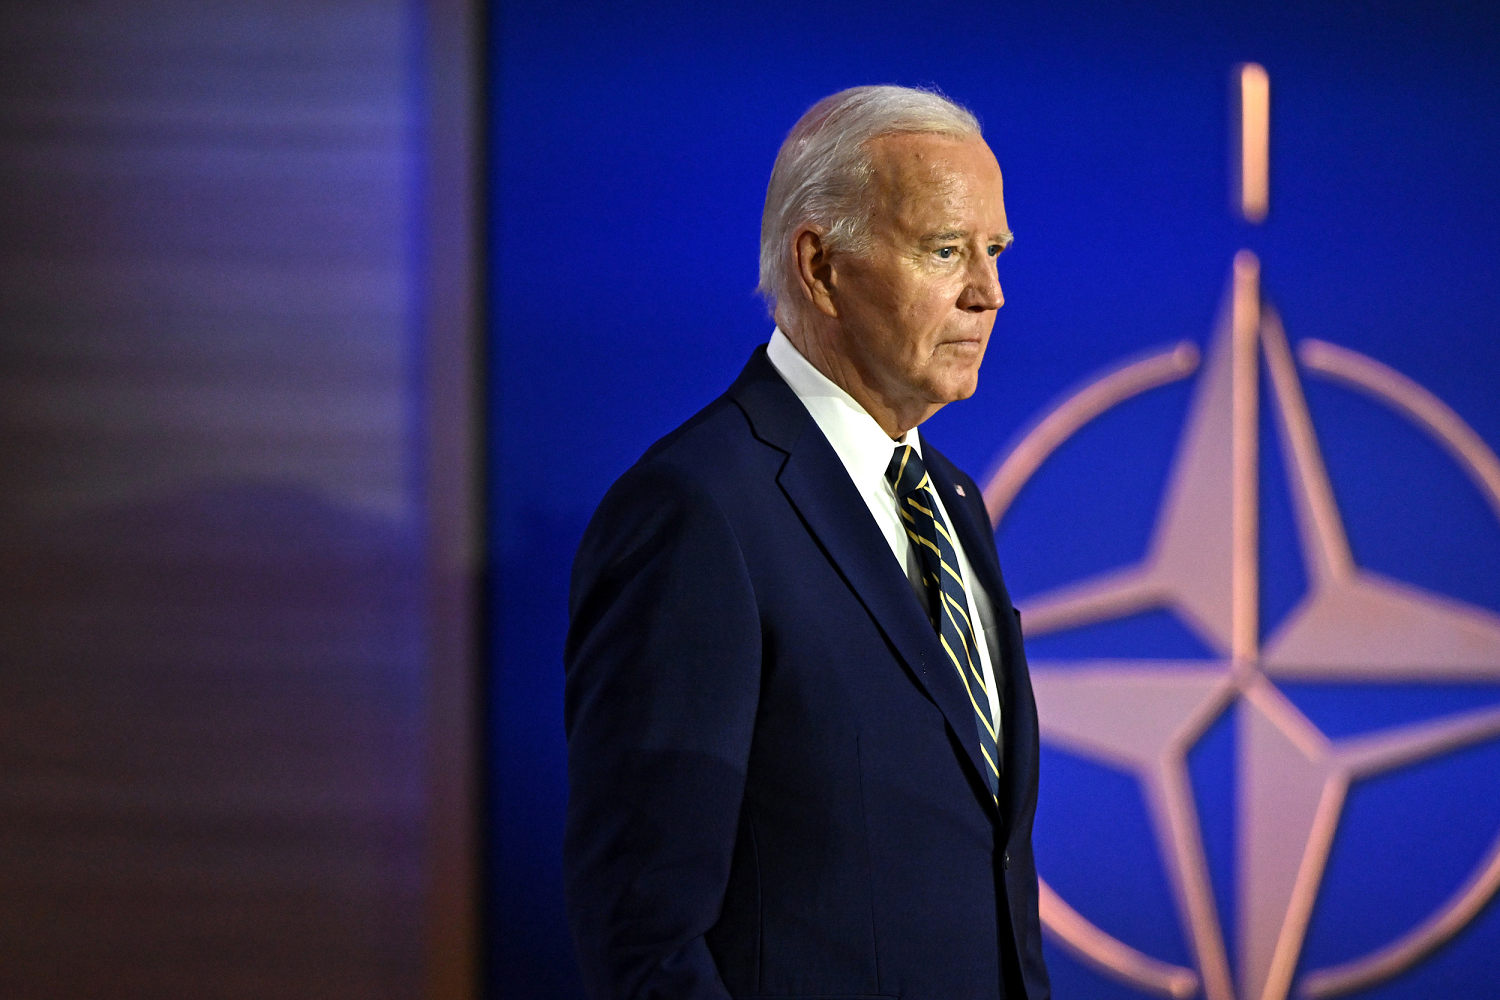 Biden insiders say 'no-one' sees a path to victory: 'He will never recover'